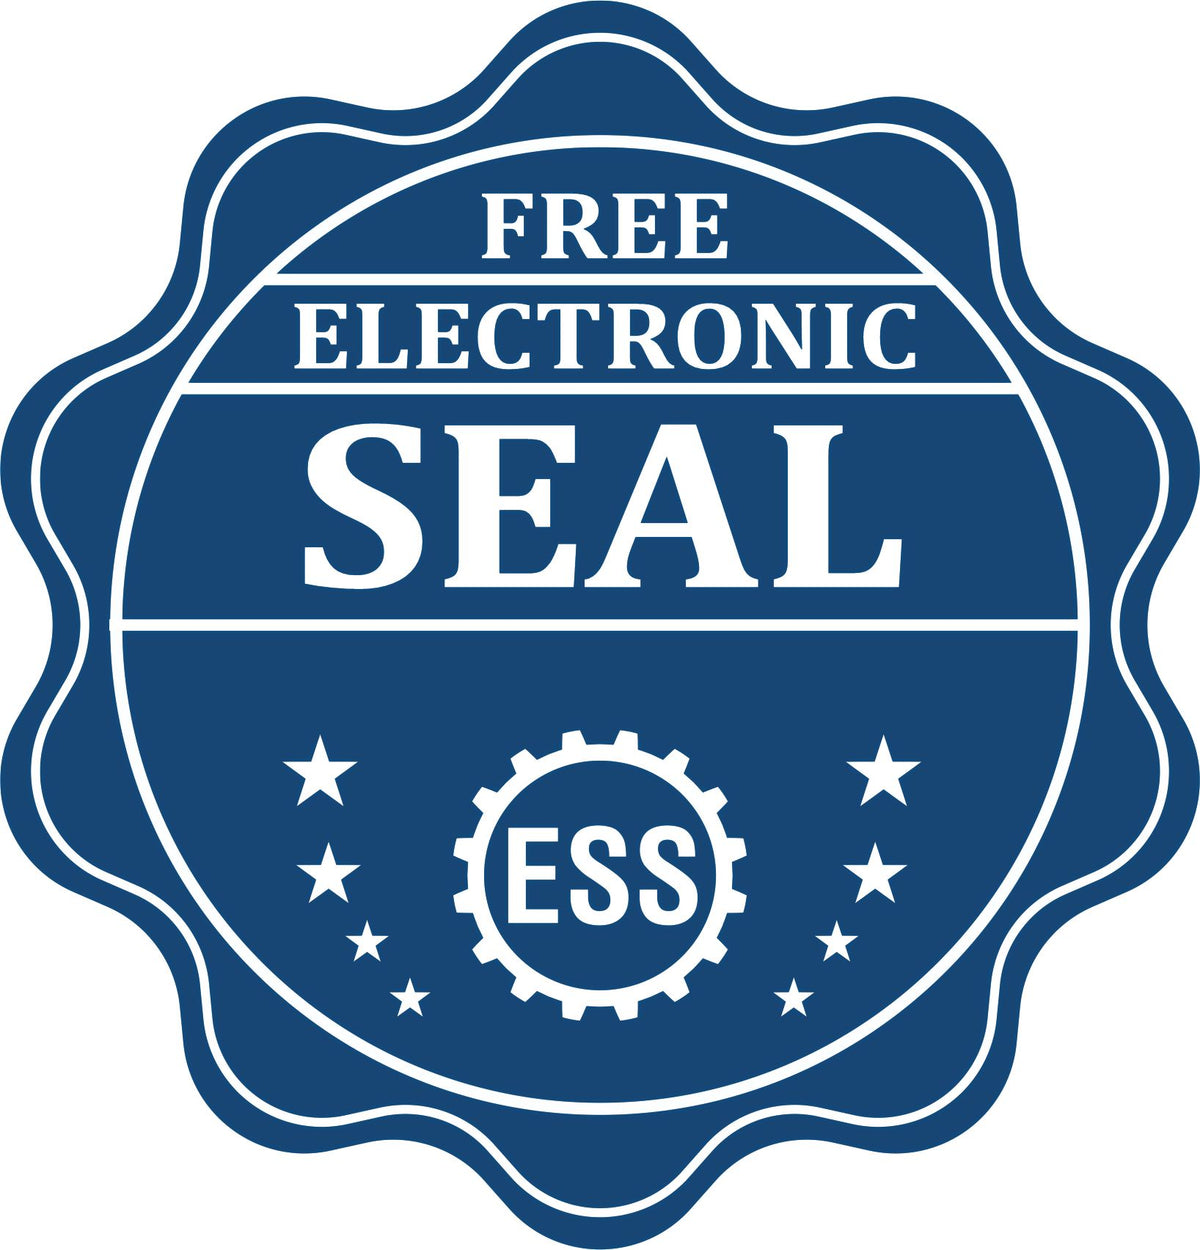 A badge showing a free electronic seal for the Long Reach Arkansas Geology Seal with stars and the ESS gear on the emblem.